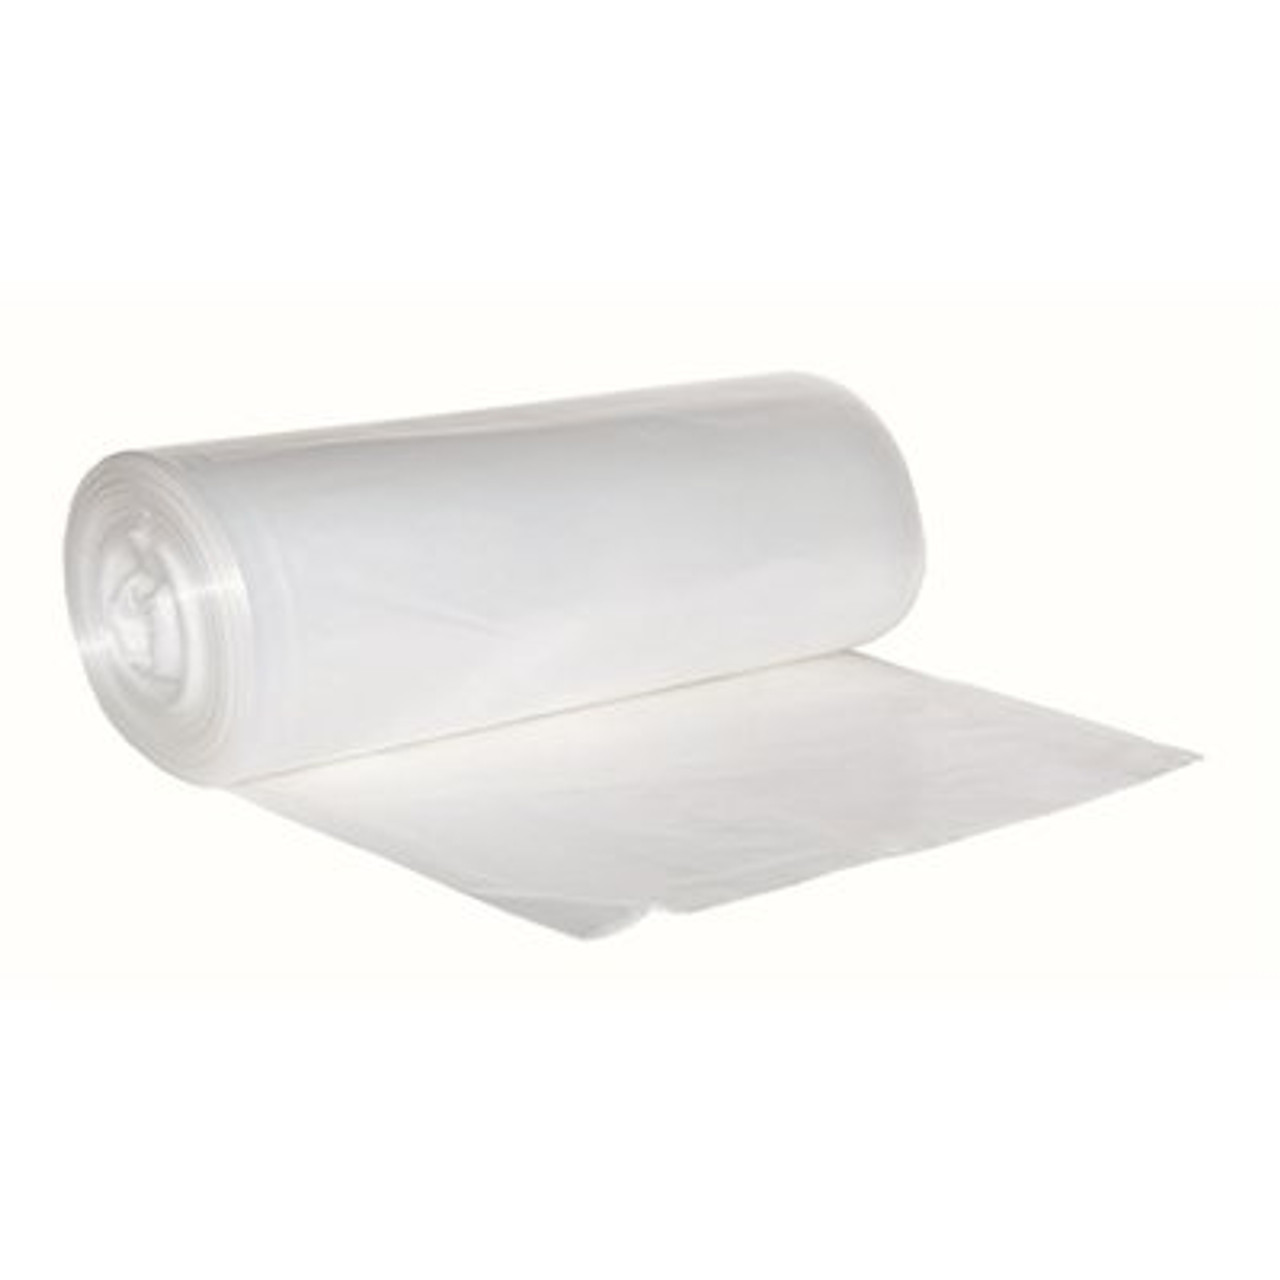 Berry Plastics Fits 56 Gal. Size, 42.5 in. x 47 in. 0.70 mil Clear Can Liner (25/Roll 8 Rolls per Case)